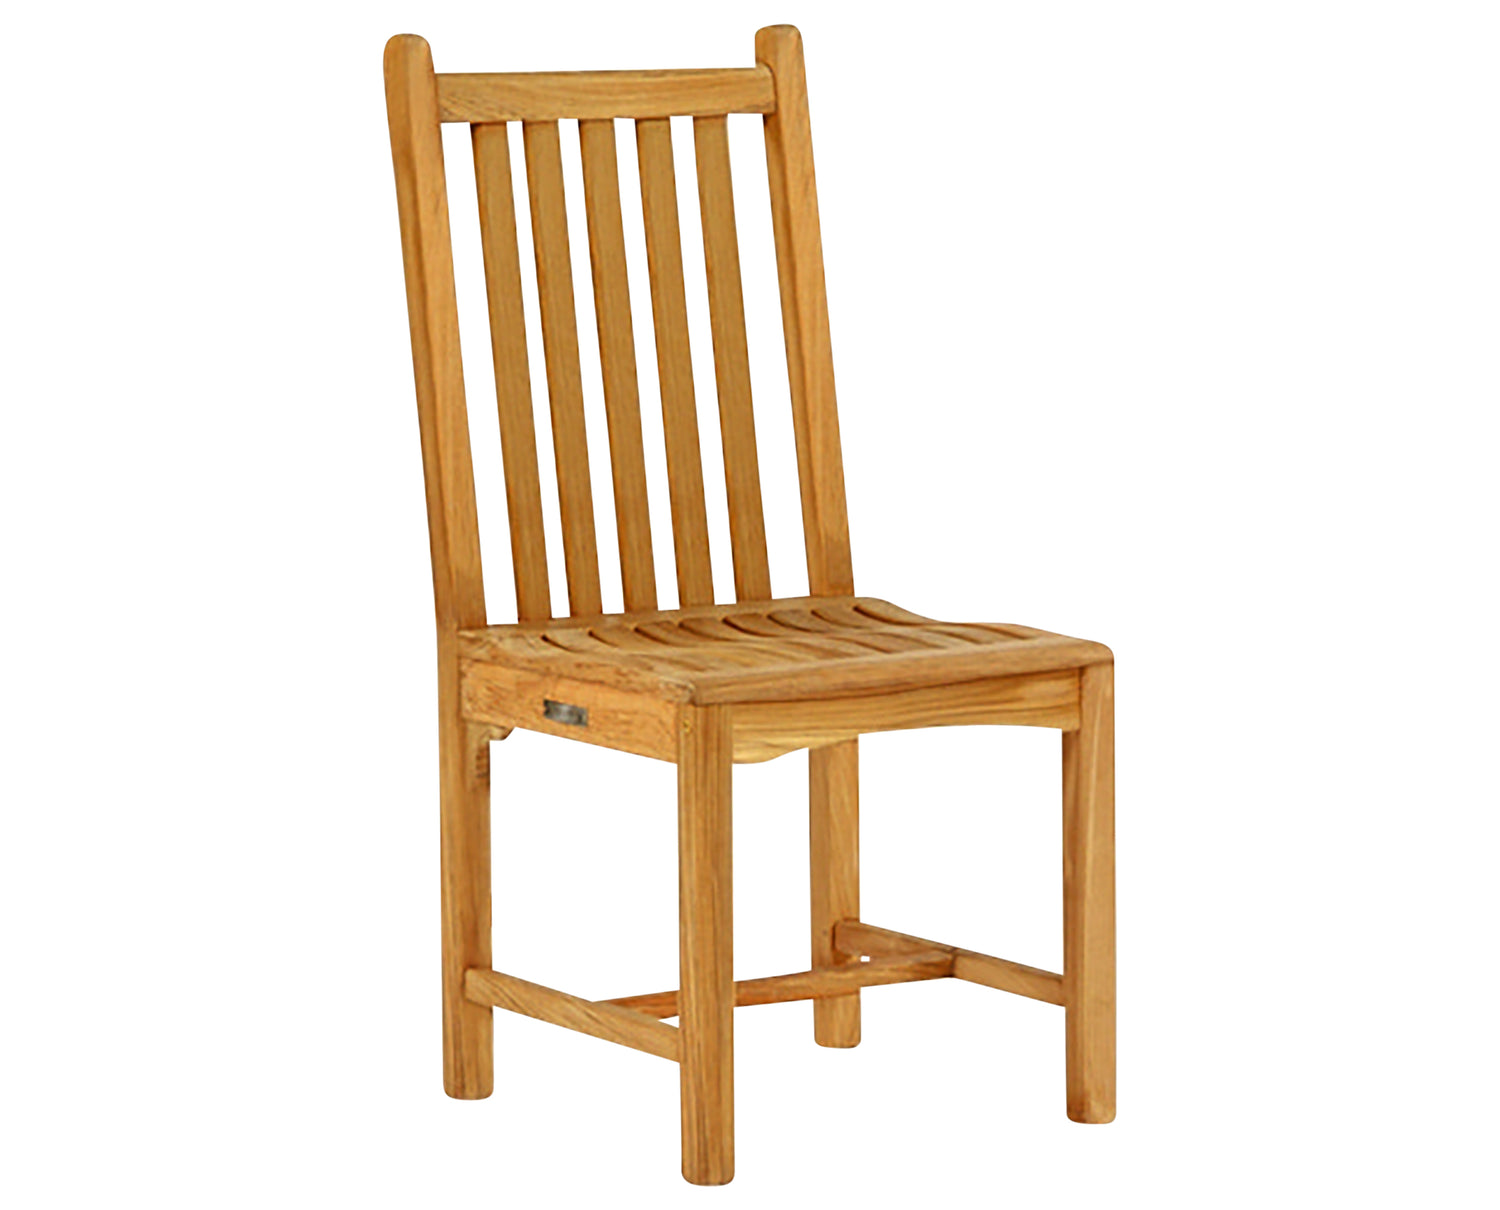 Dining Side Chair | Kingsley Bate Classic Collection | Valley Ridge Furniture